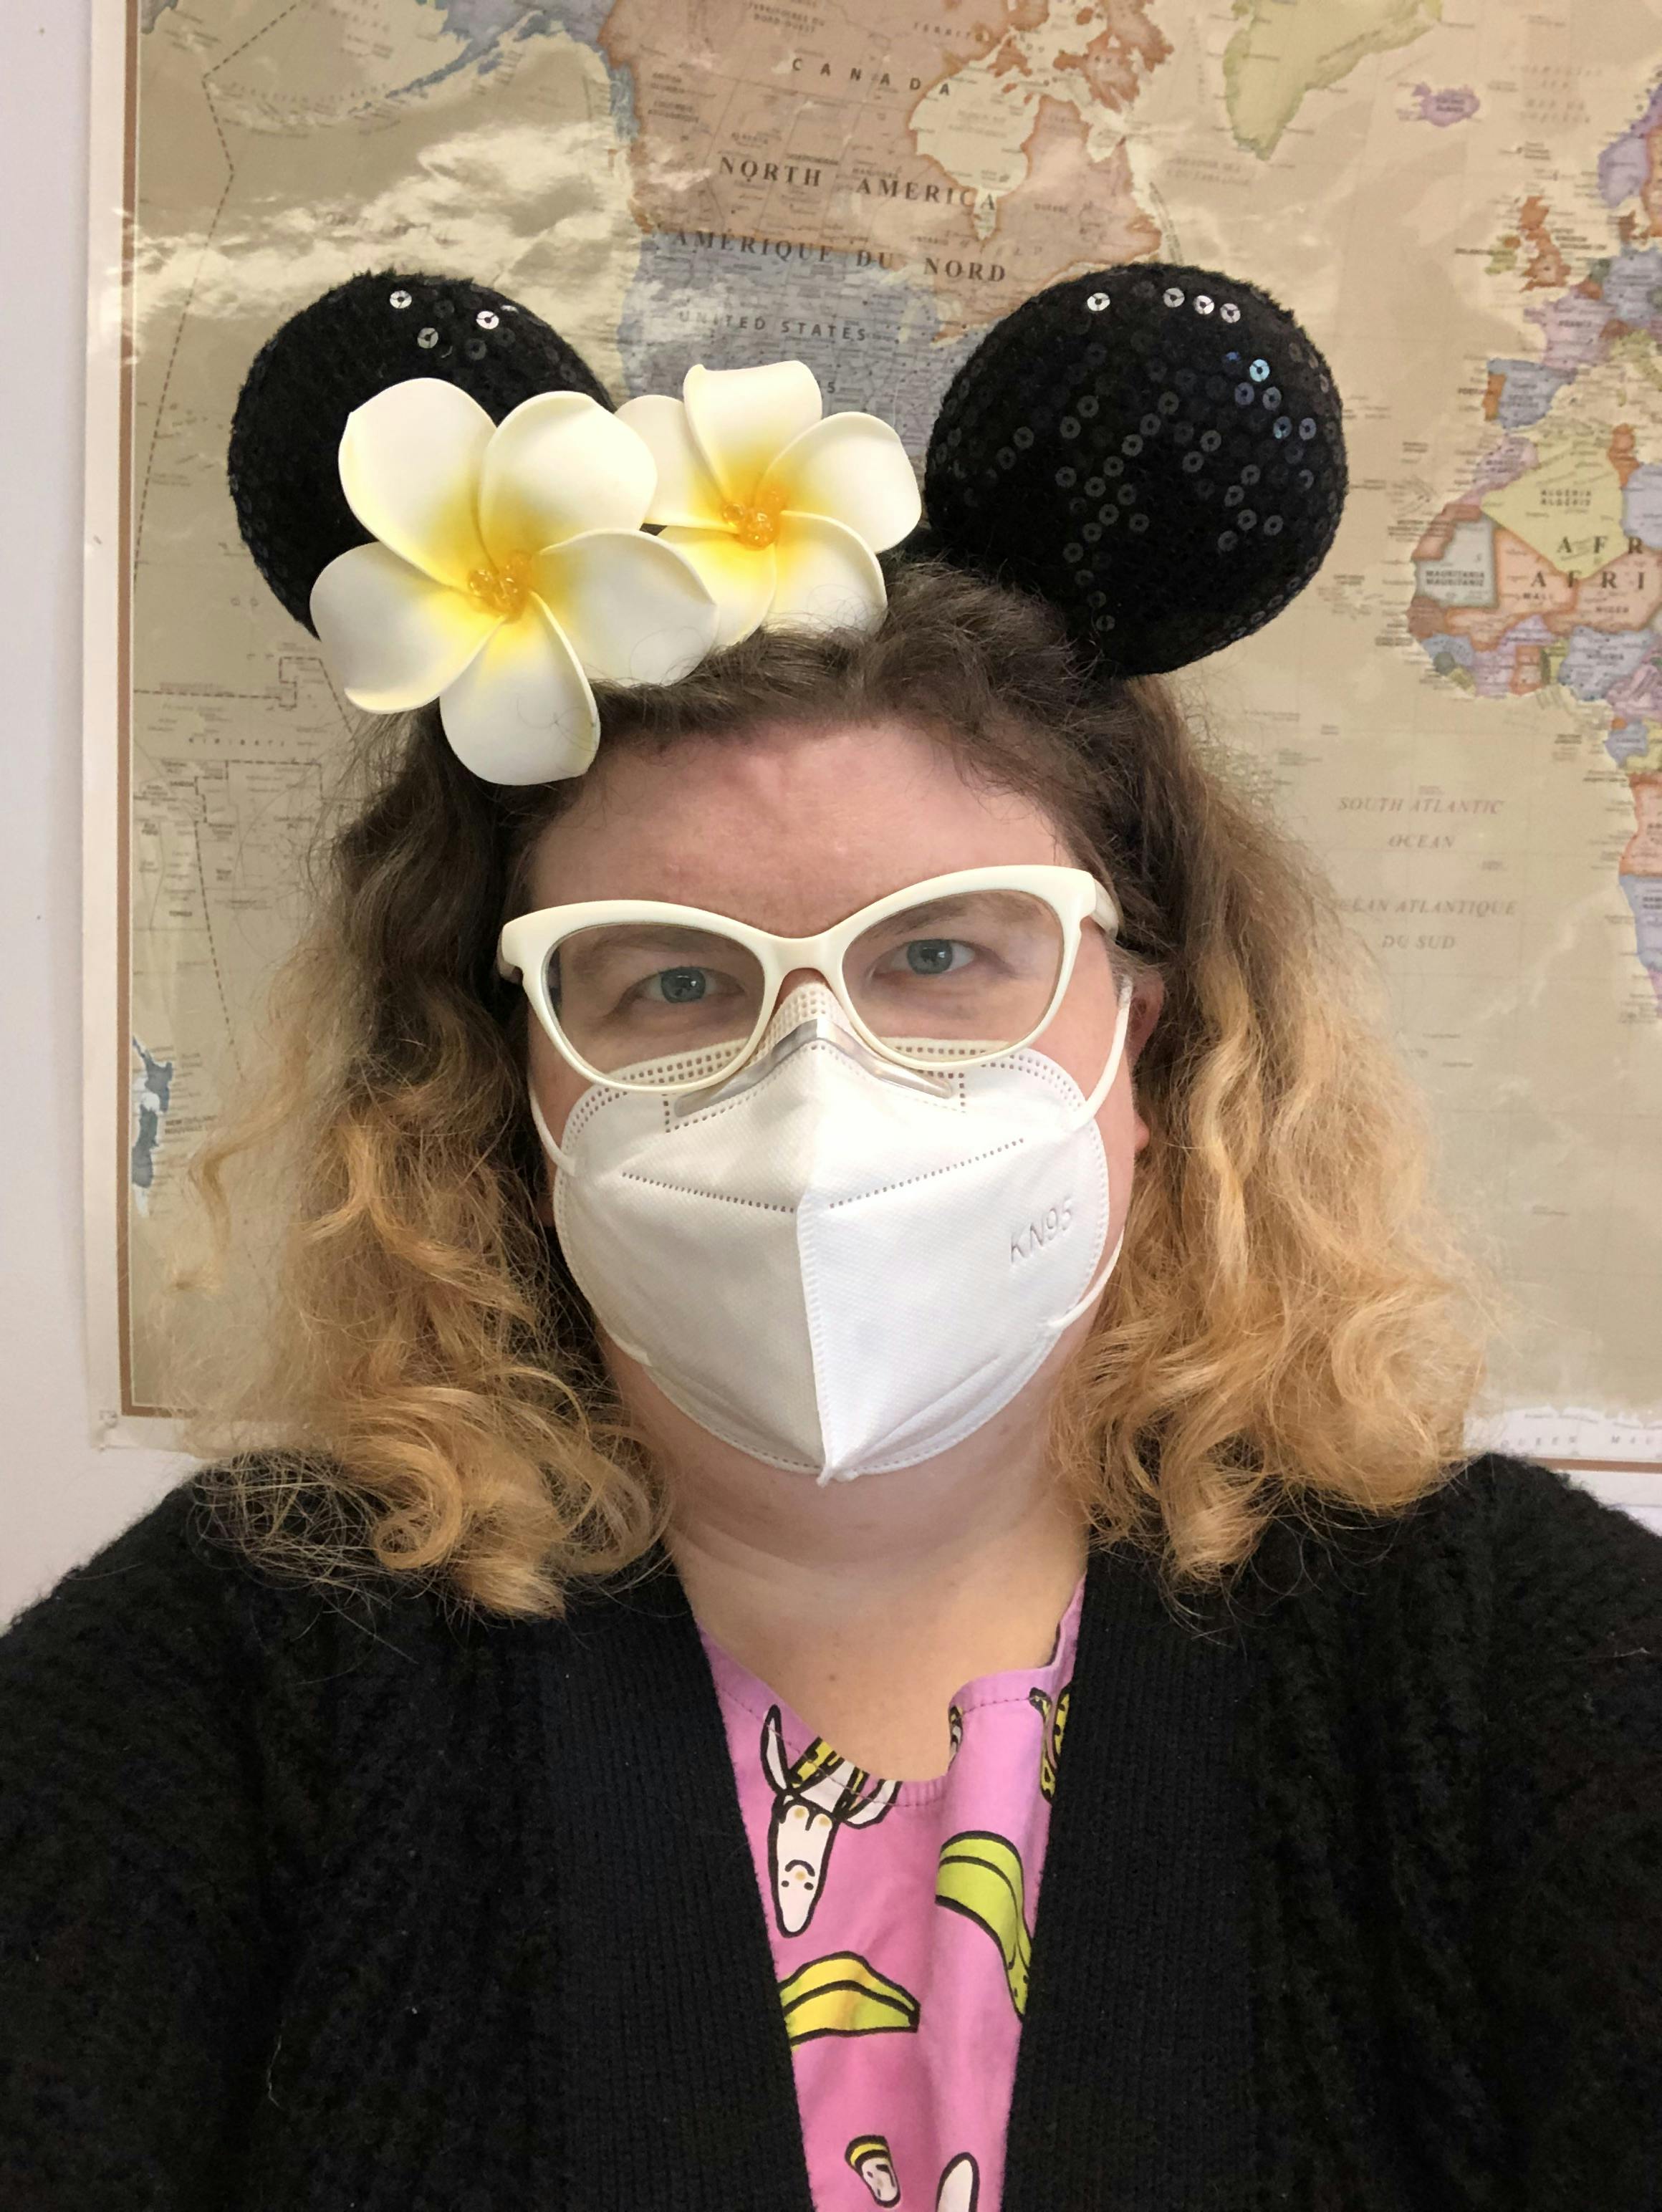 white woman with curly hair and white framed glasses wearing a white face mask and black sequined Disney mouse ears with white flowers